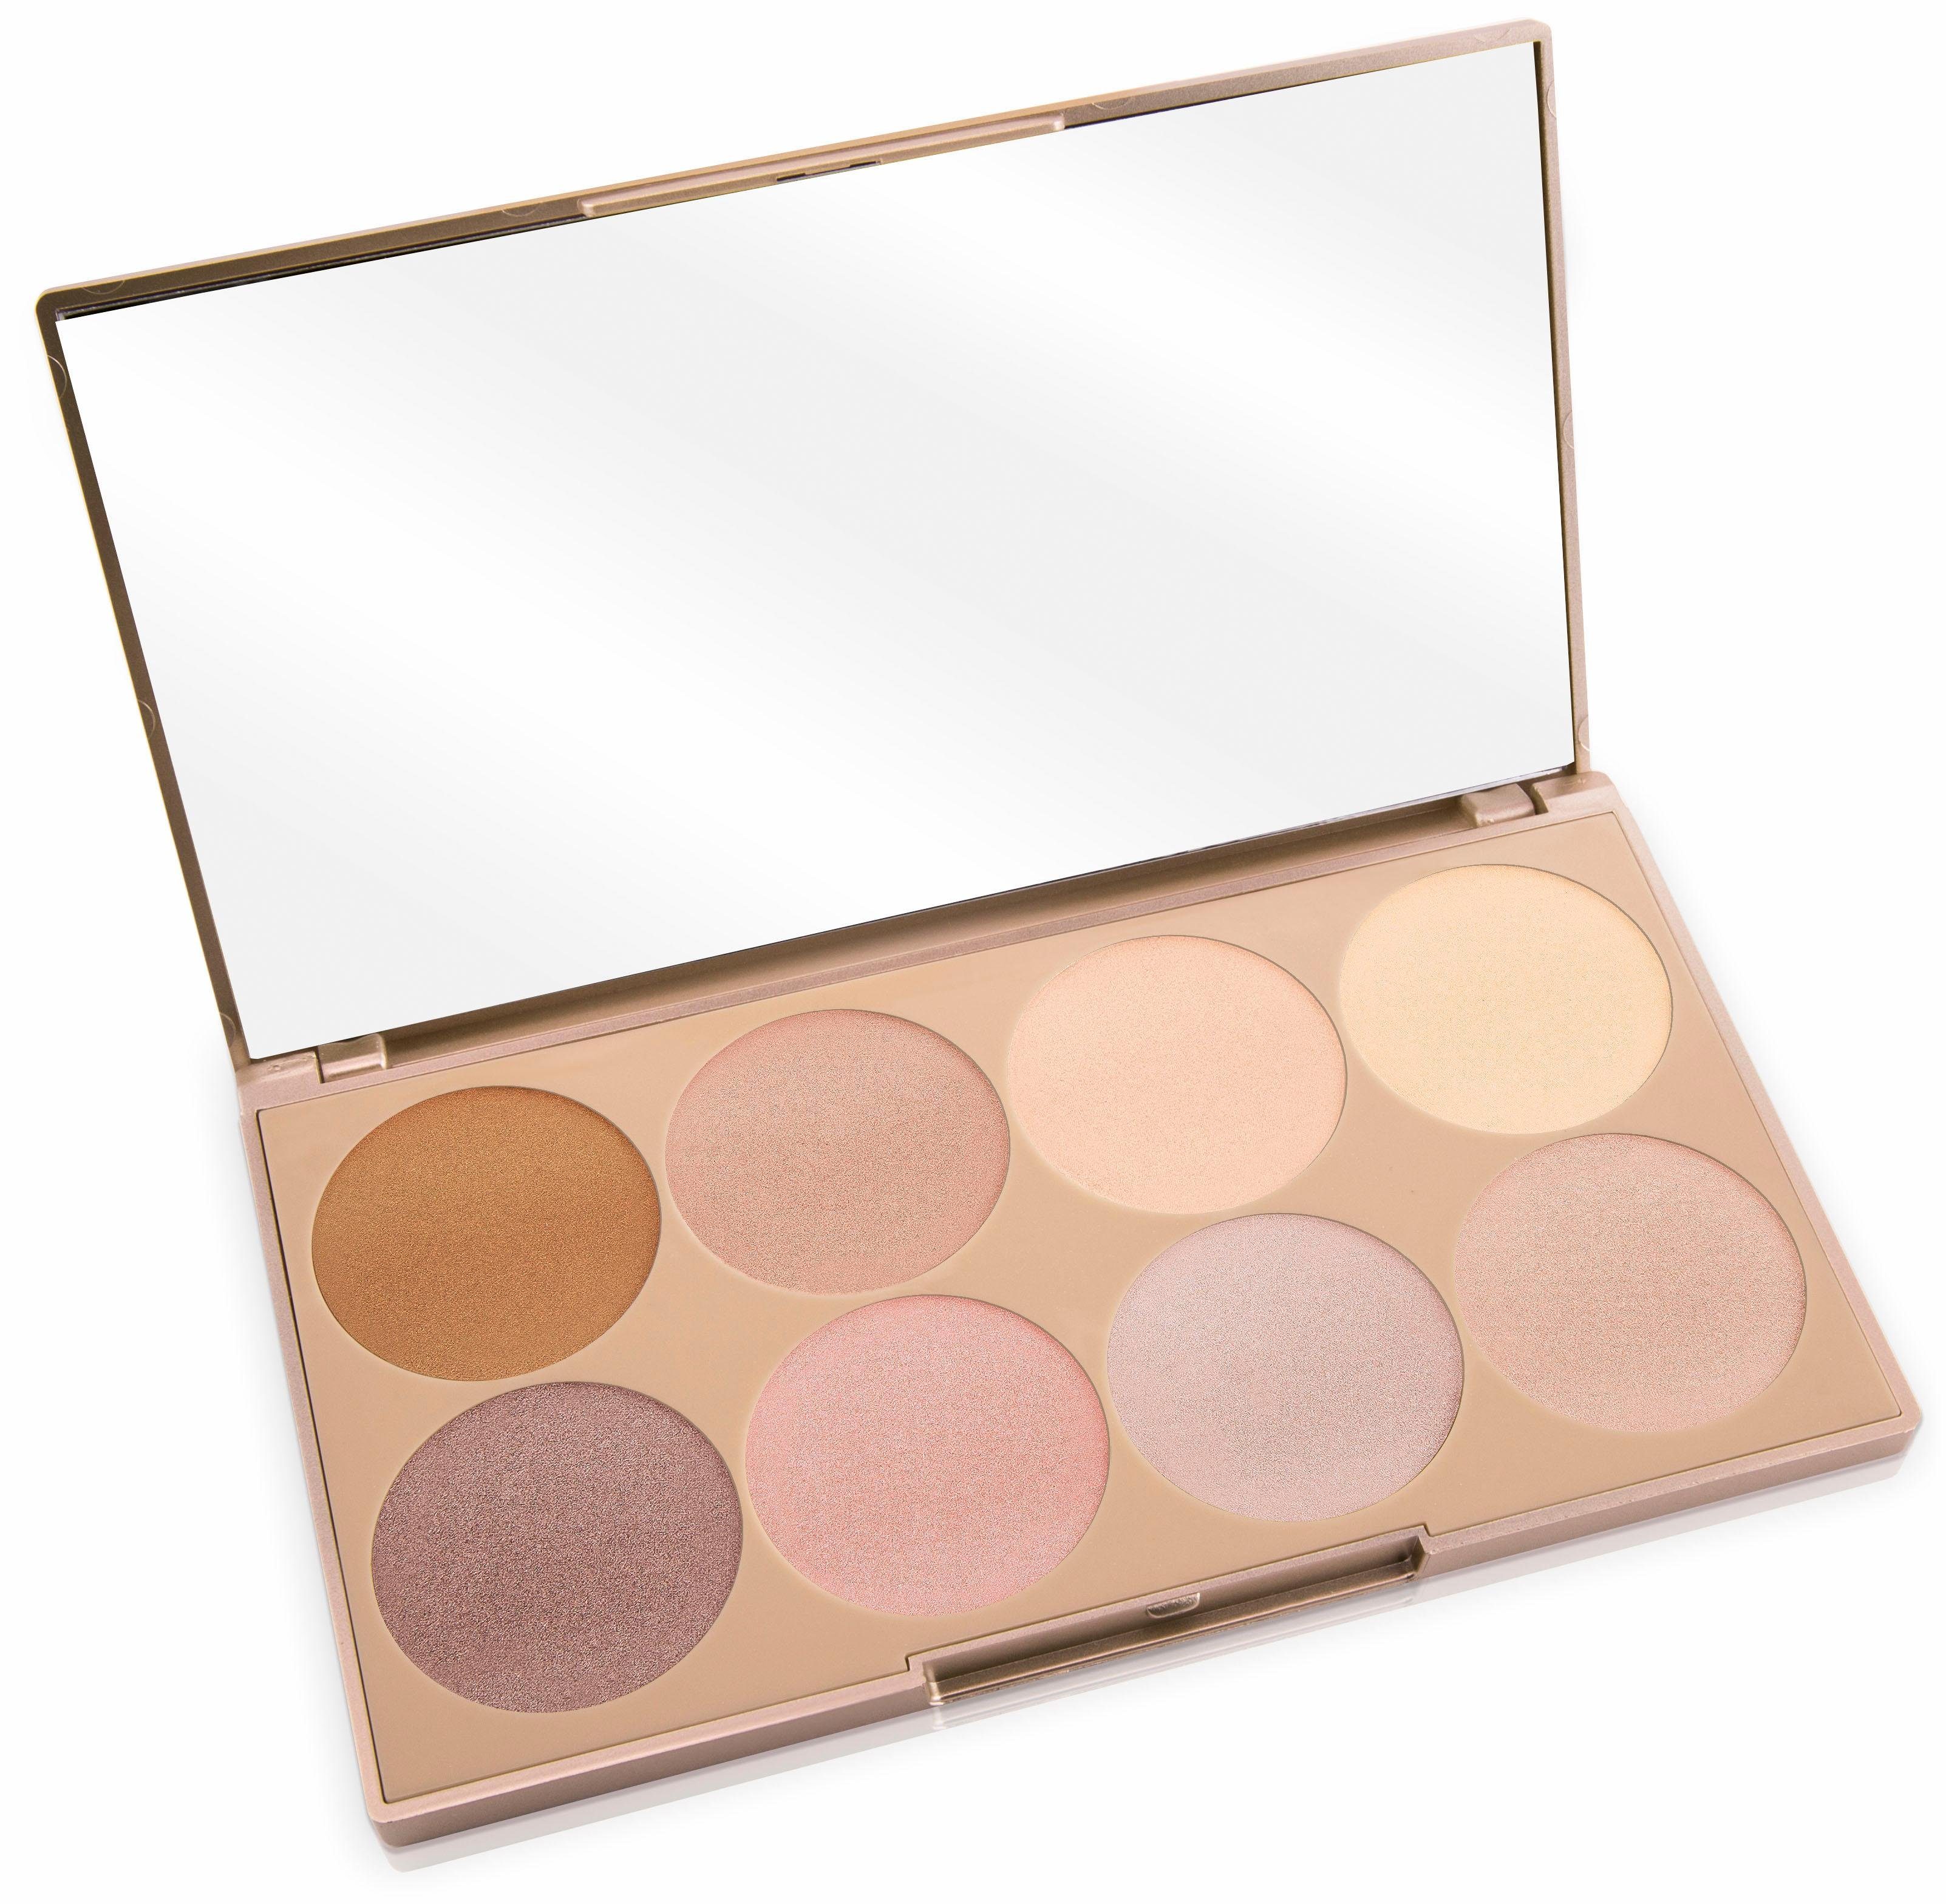 Luvia Cosmetics Highlighter-Palette Contouring Essential 8 Shades 8-tlg., - 1, Glow Vol. Prime Farben